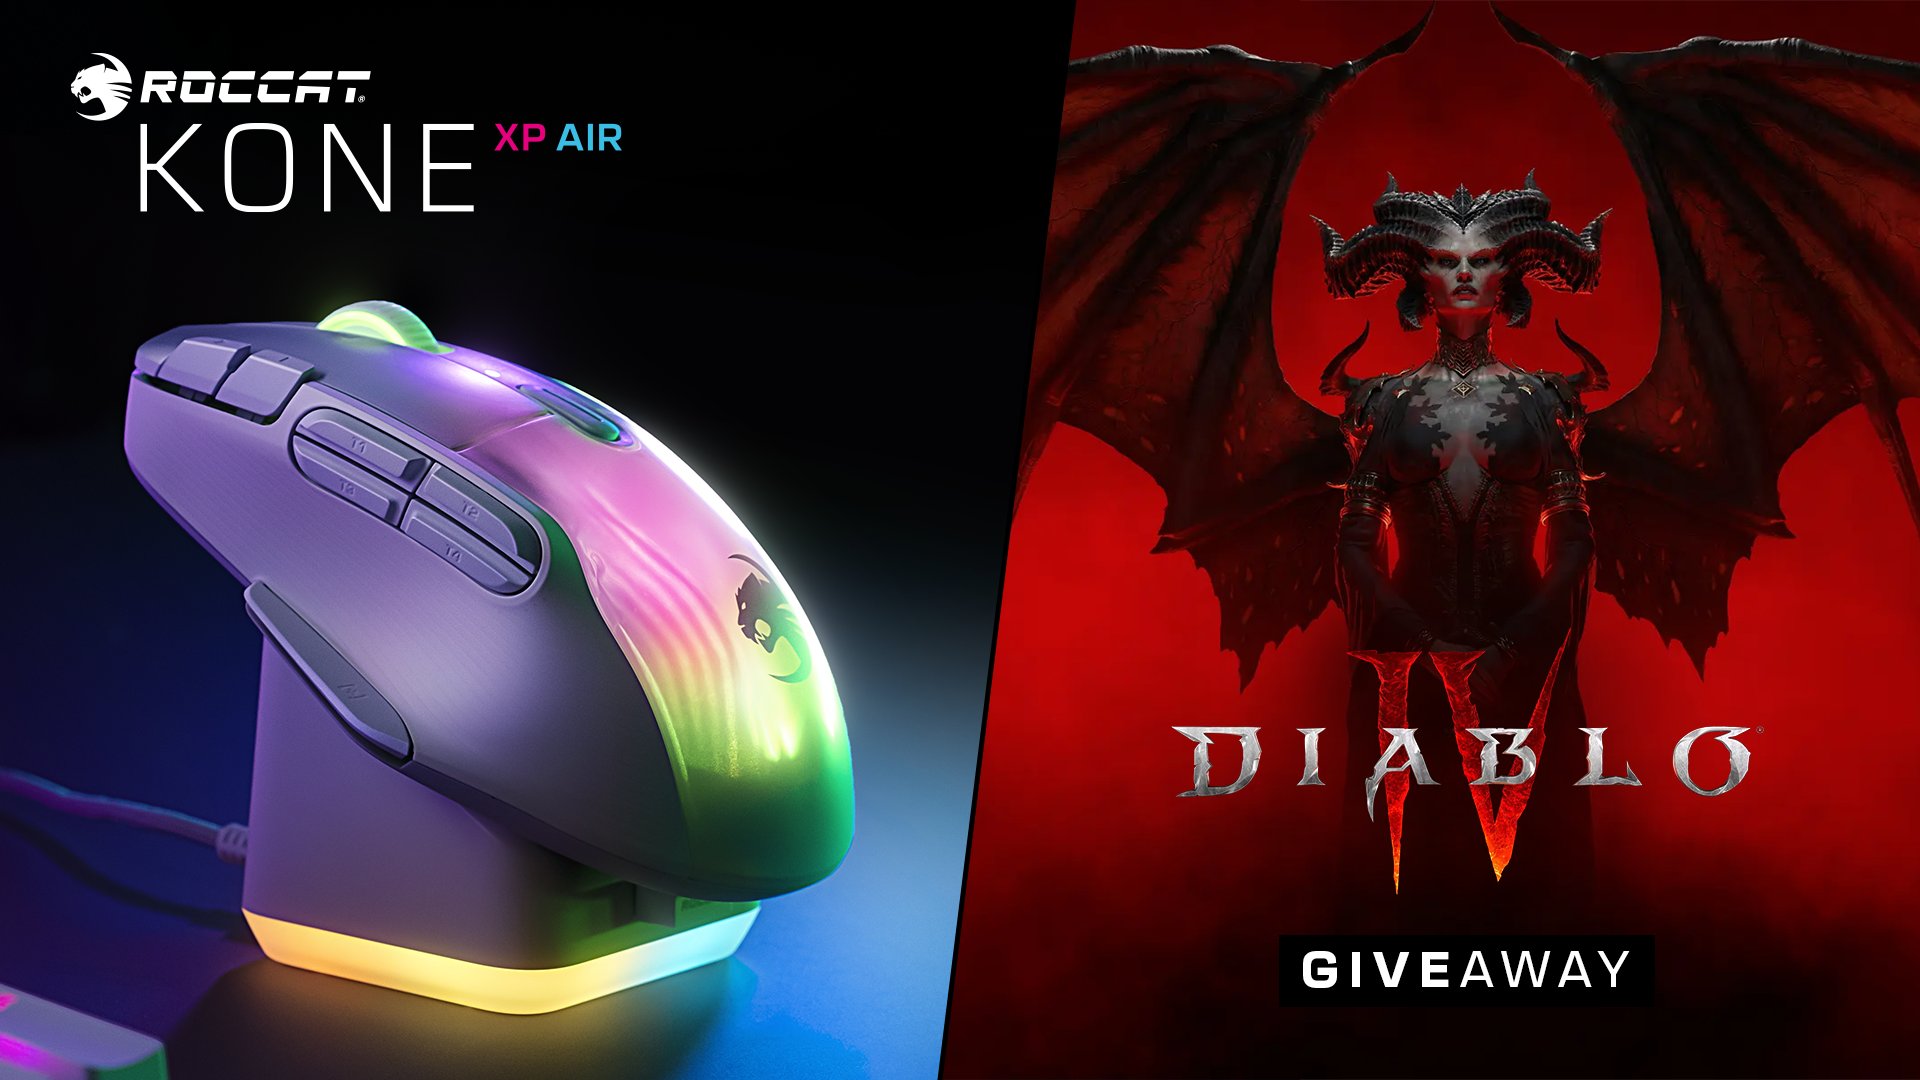 ROCCAT on X: Diablo 4 has arrived! 🥊 To celebrate its release, we're  giving away a copy of the game and a Kone XP Air gaming mouse! 🎧 To enter,  simply follow @